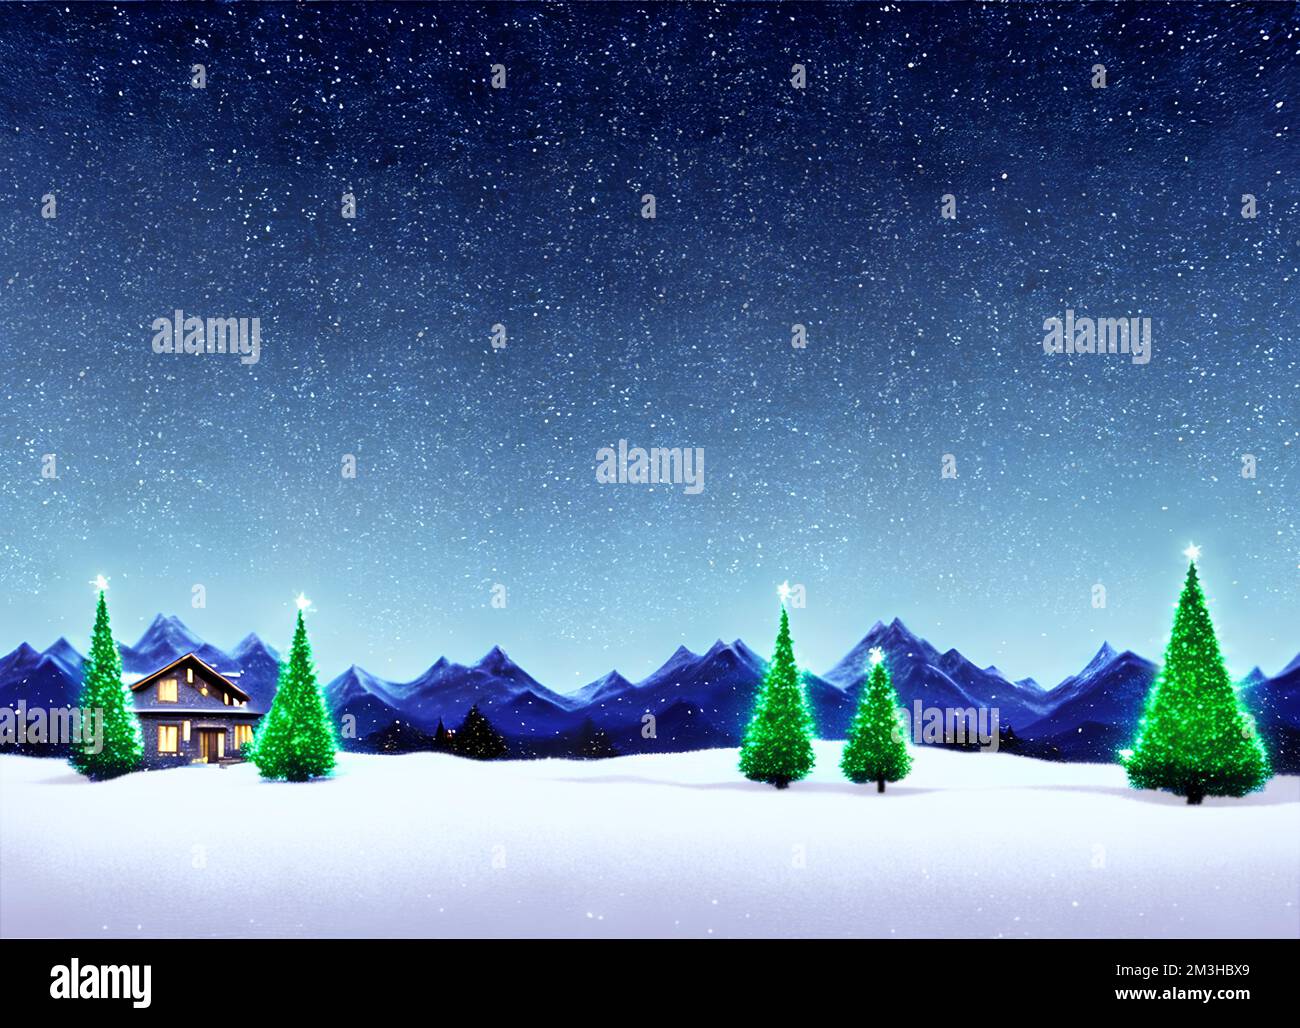 Christmas landscape - cottage, trees, snow and starry sky - digital illustration Stock Photo